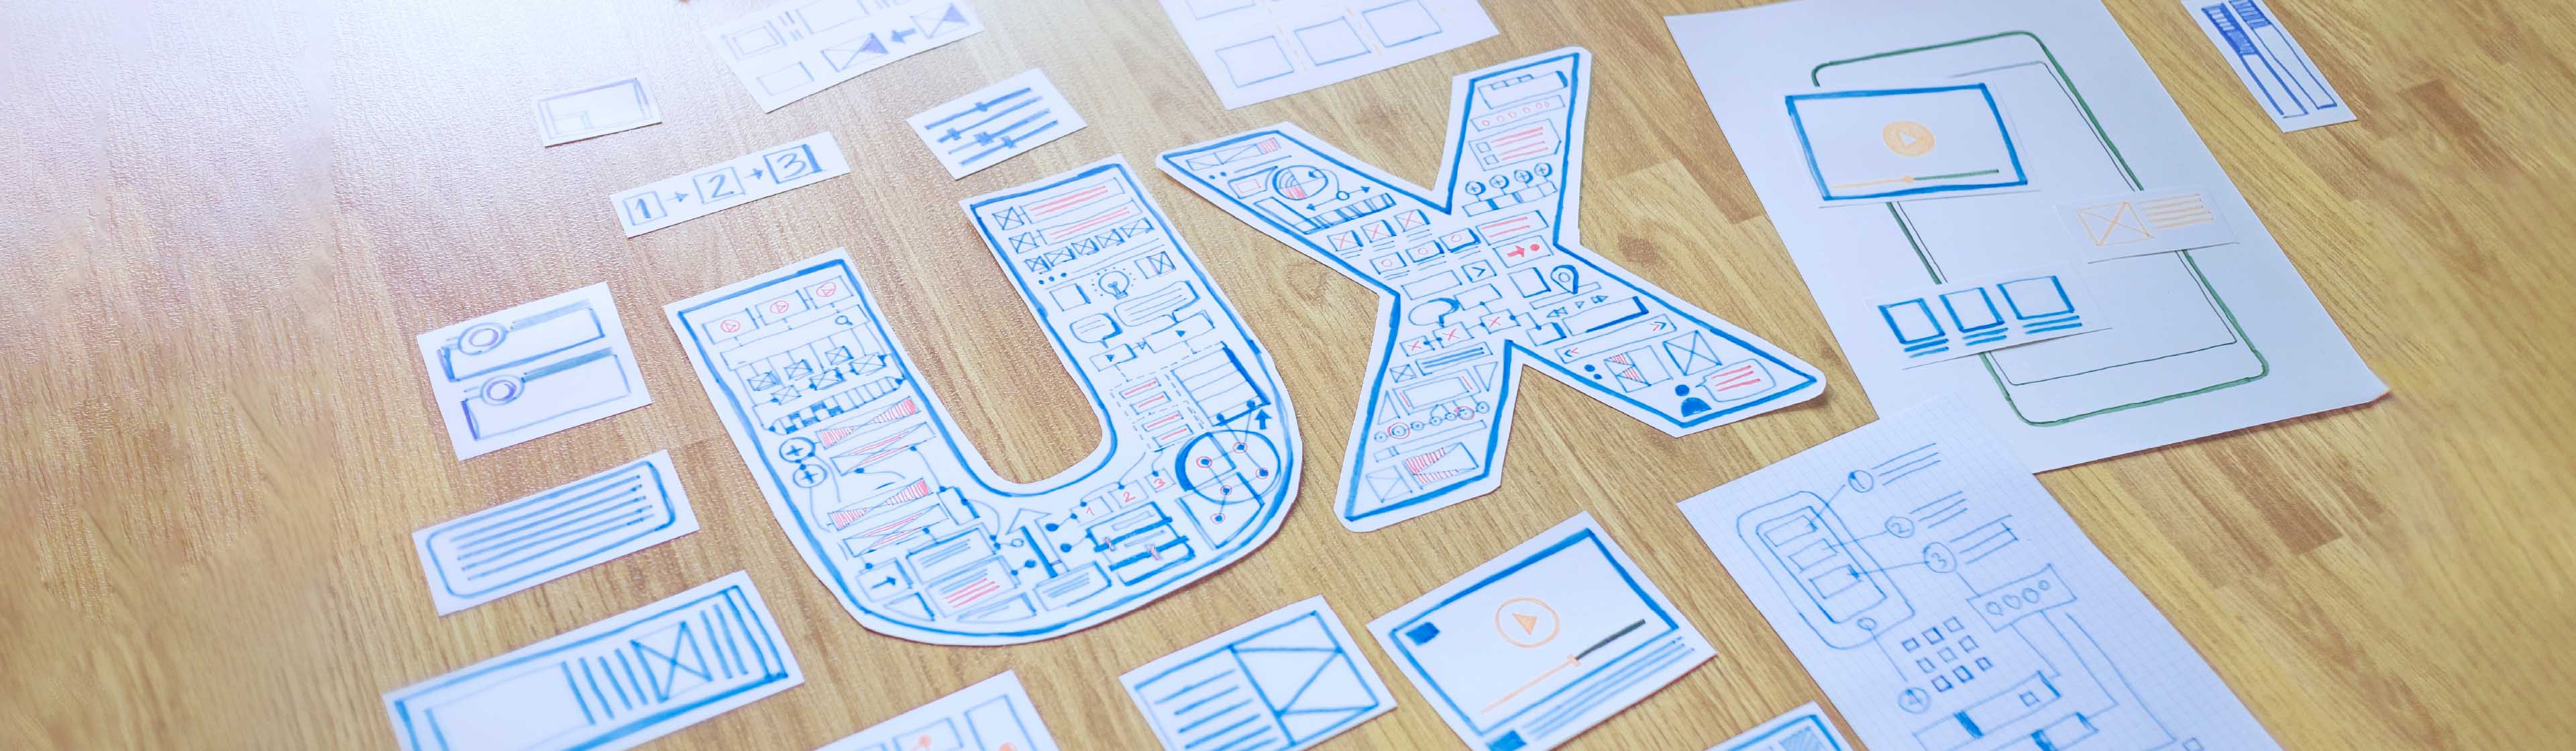 Multiple pieces of paper with wireframes and a cut out of the letters 'UX'